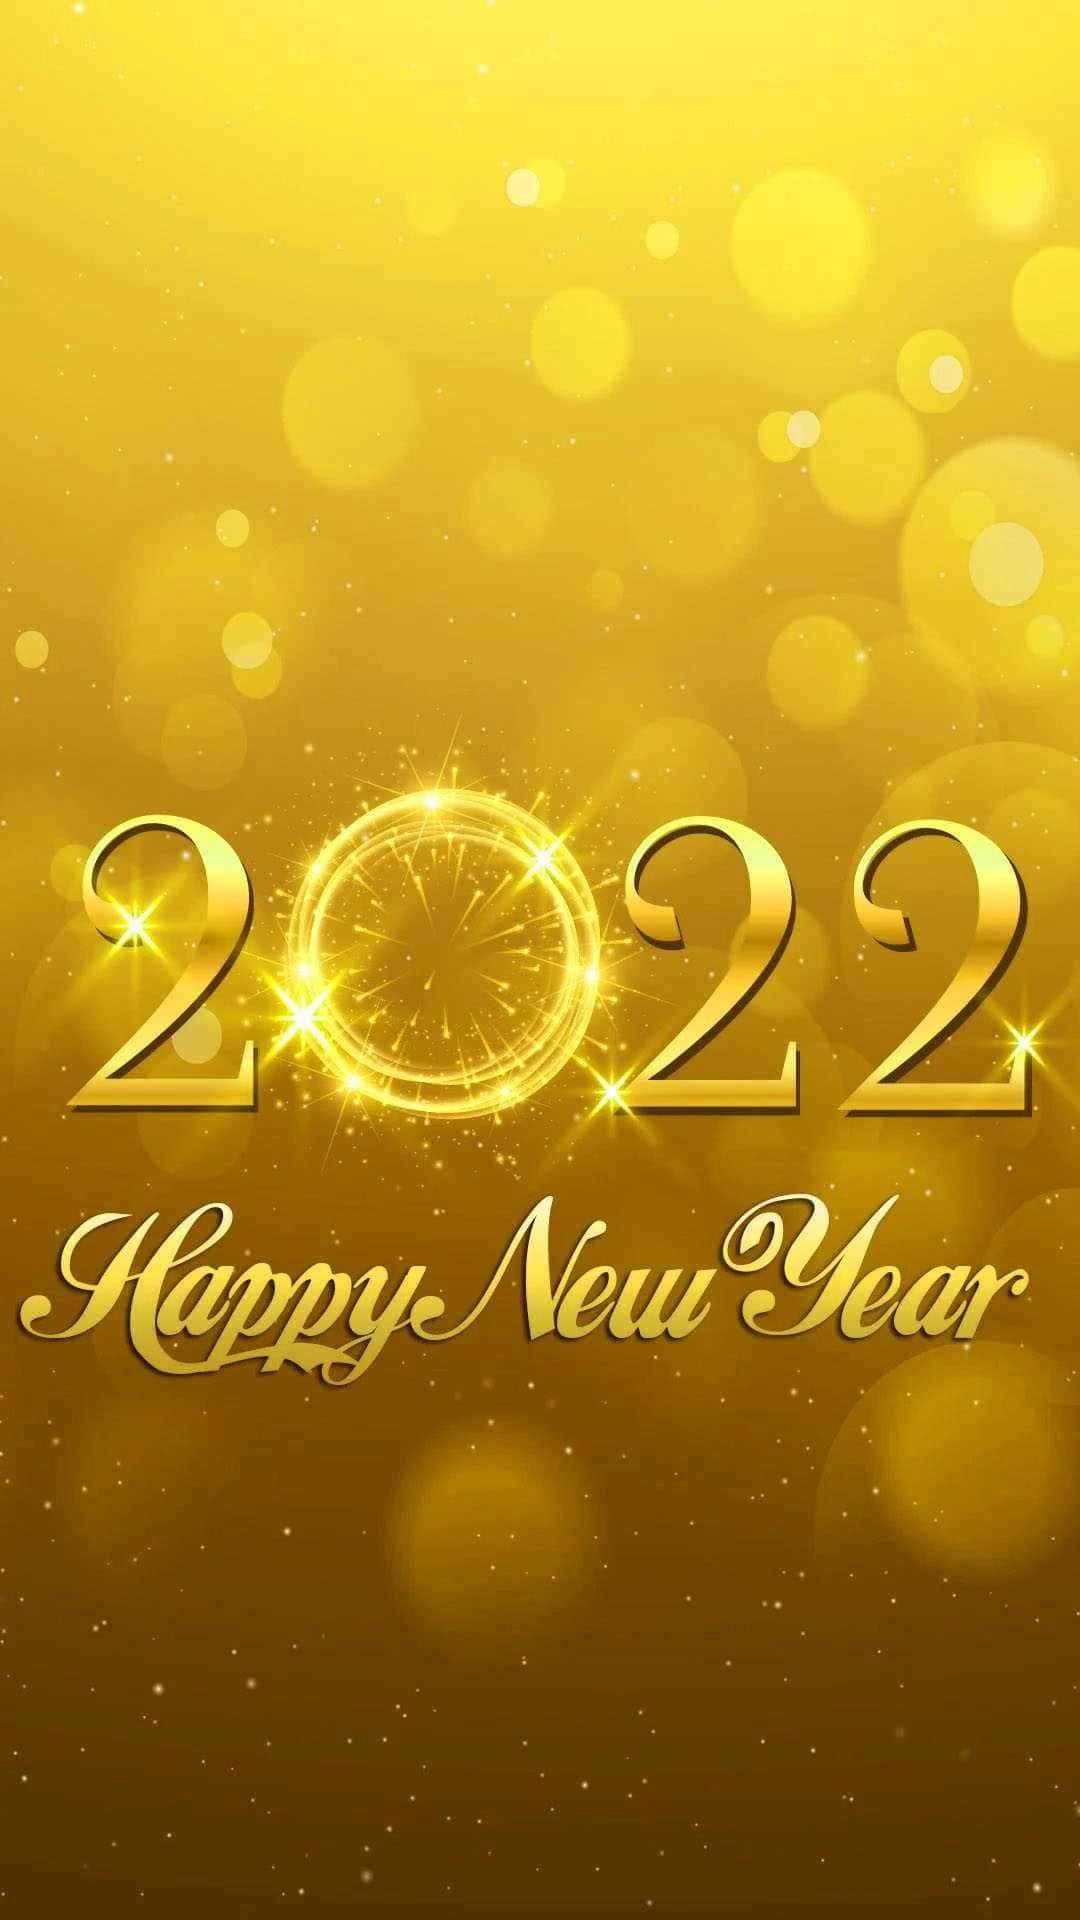 happy new year 2022 wallpaper for iphone from FreePik.com